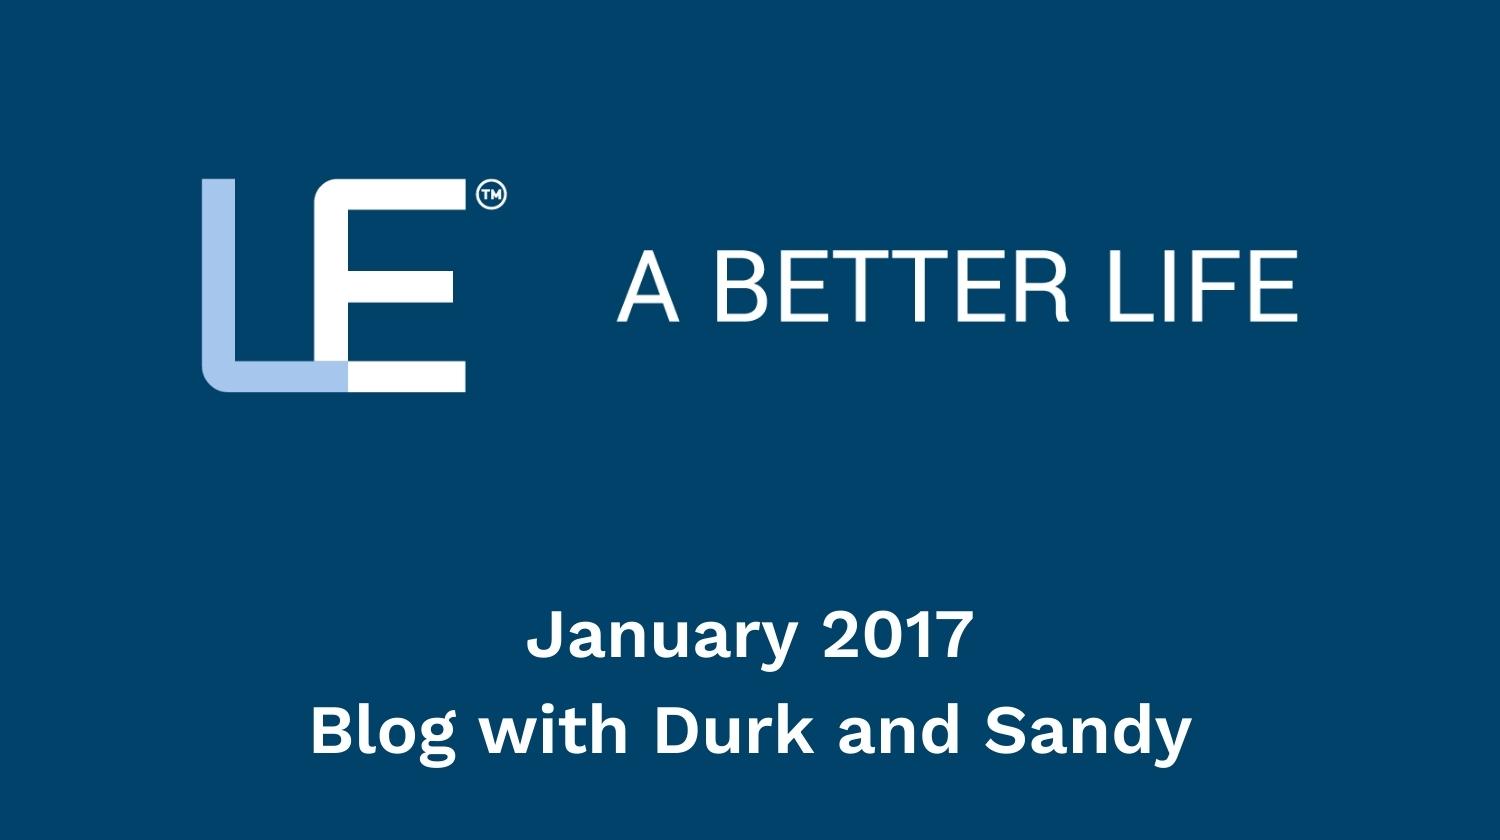 January 2017 Blog with Durk and Sandy